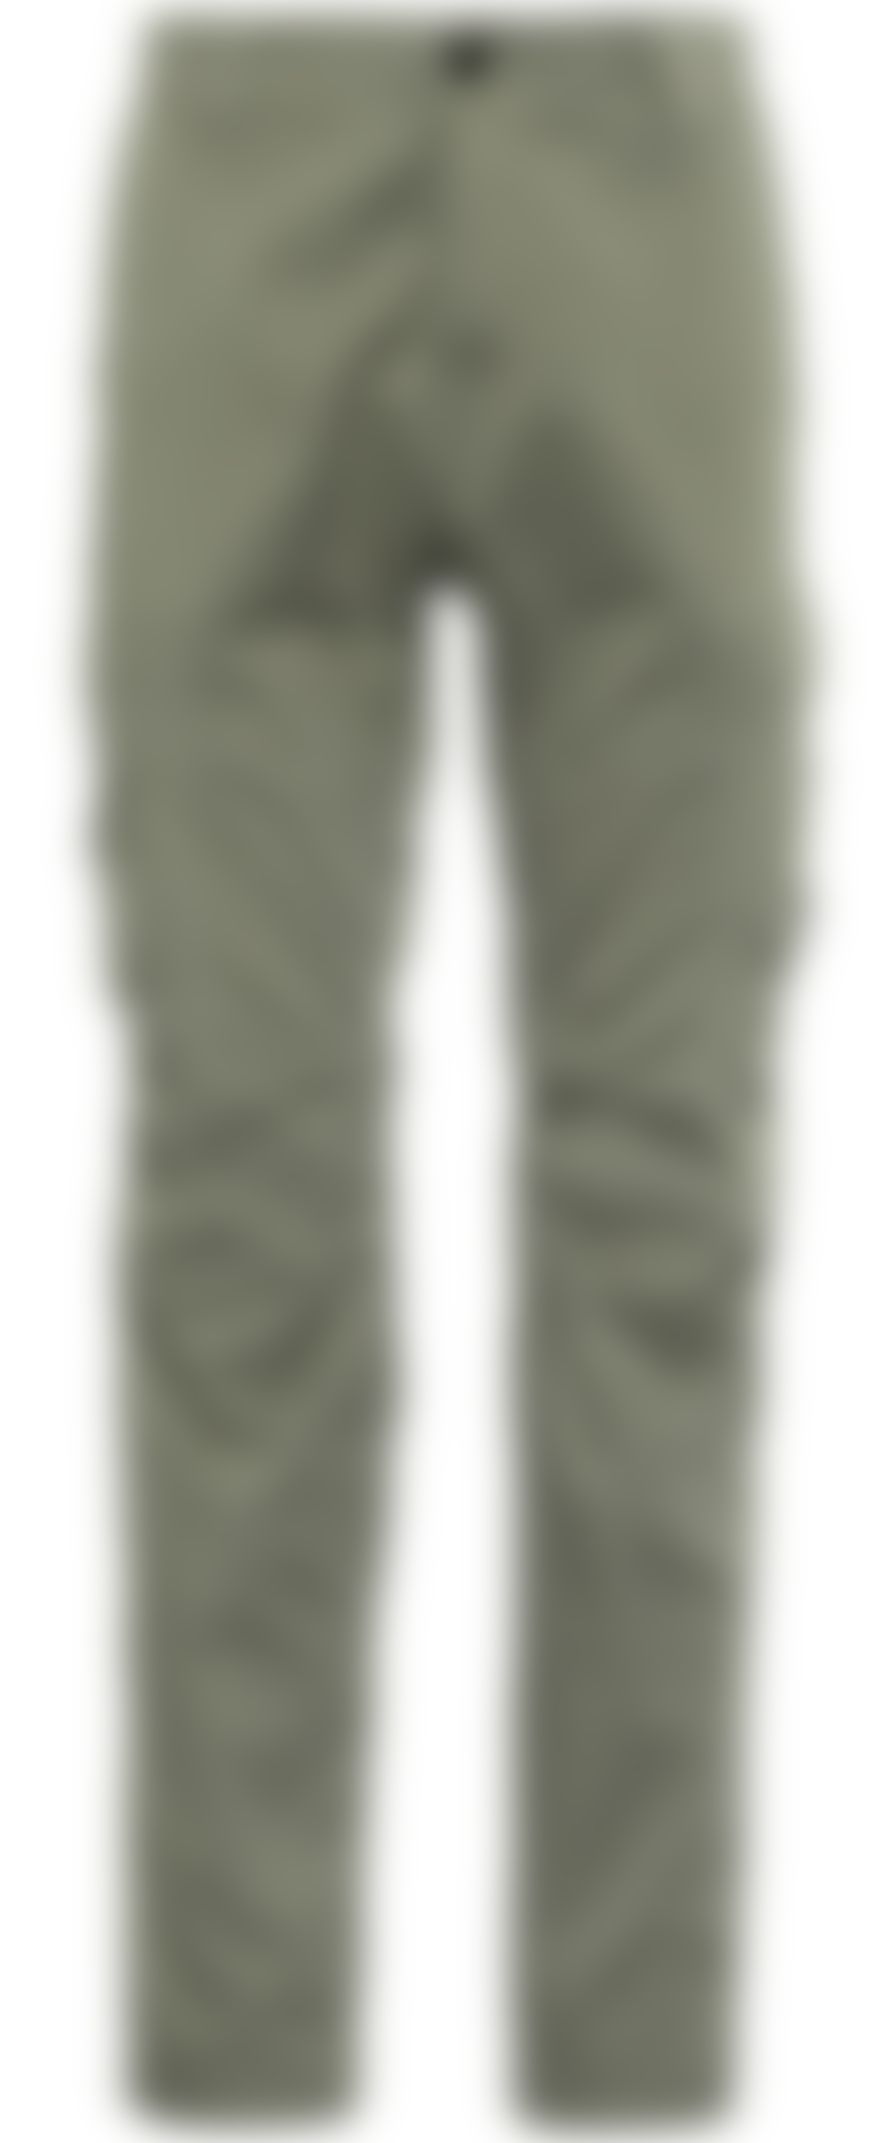 C.P. Company C.p. Company Stretch Sateen Loose Cargo Pants Agave Green